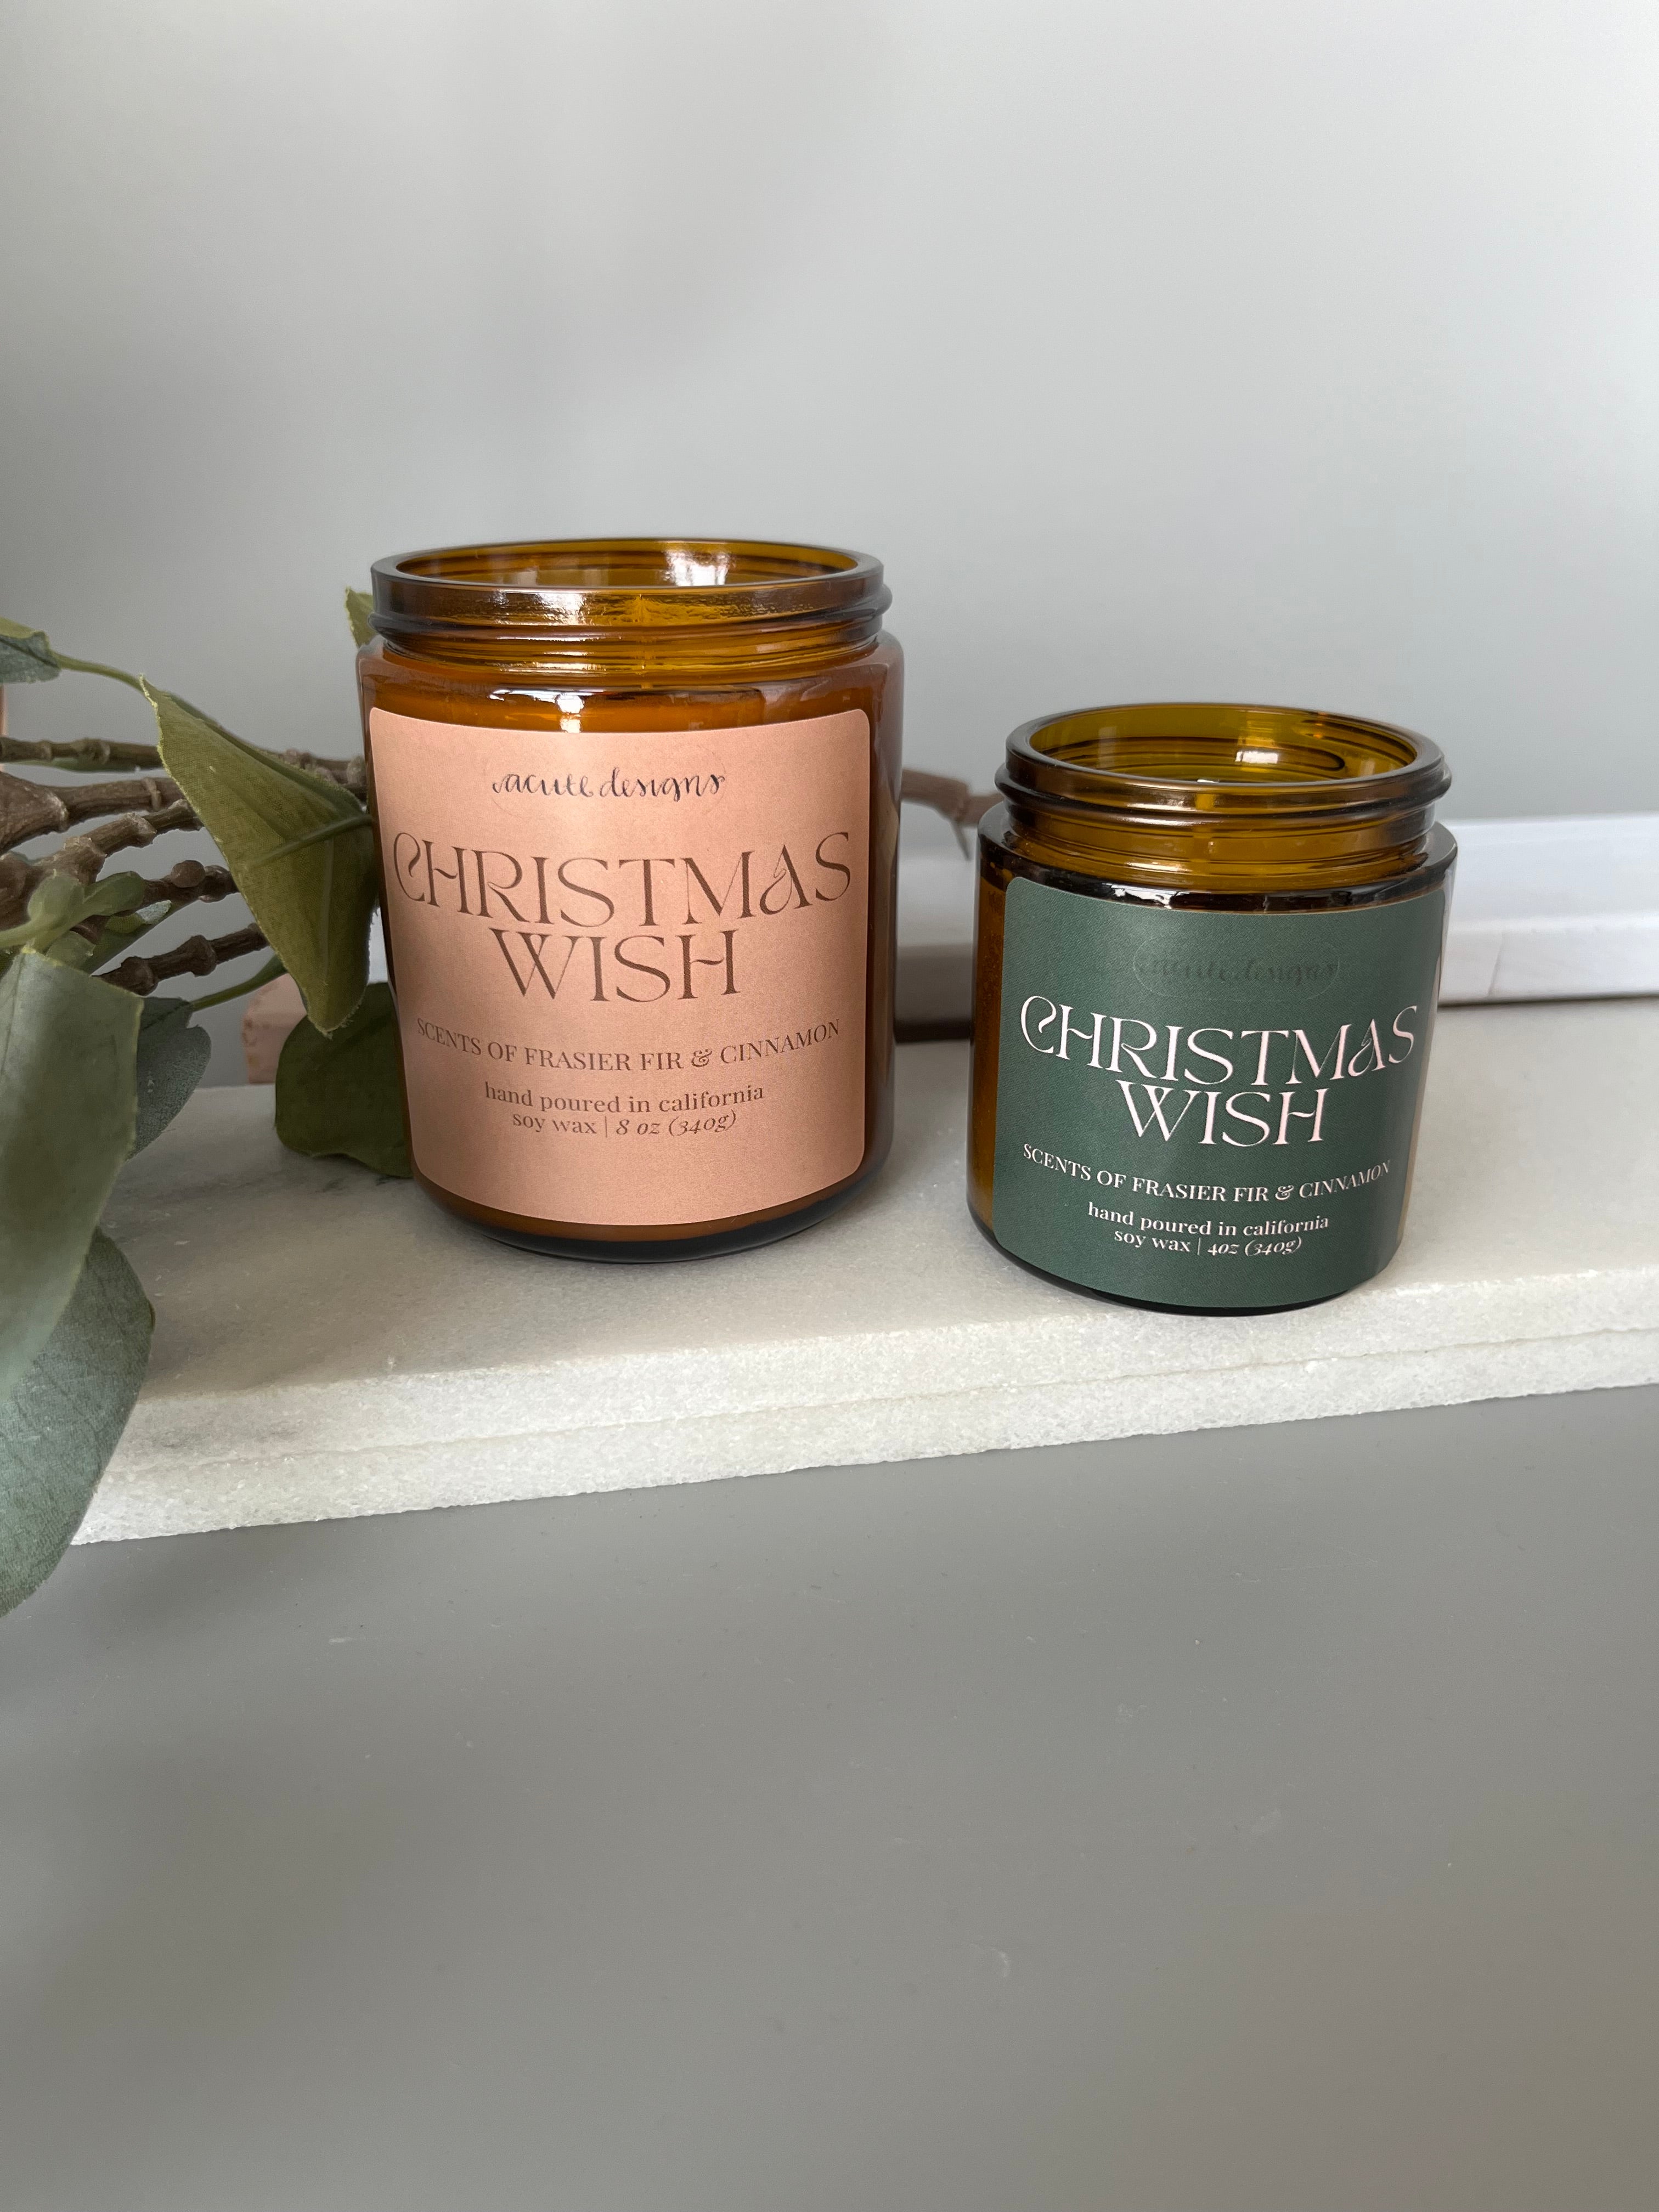 Christmas Wish Candle -  Scented Holiday Candle, Scents of frasier fir and cinamon